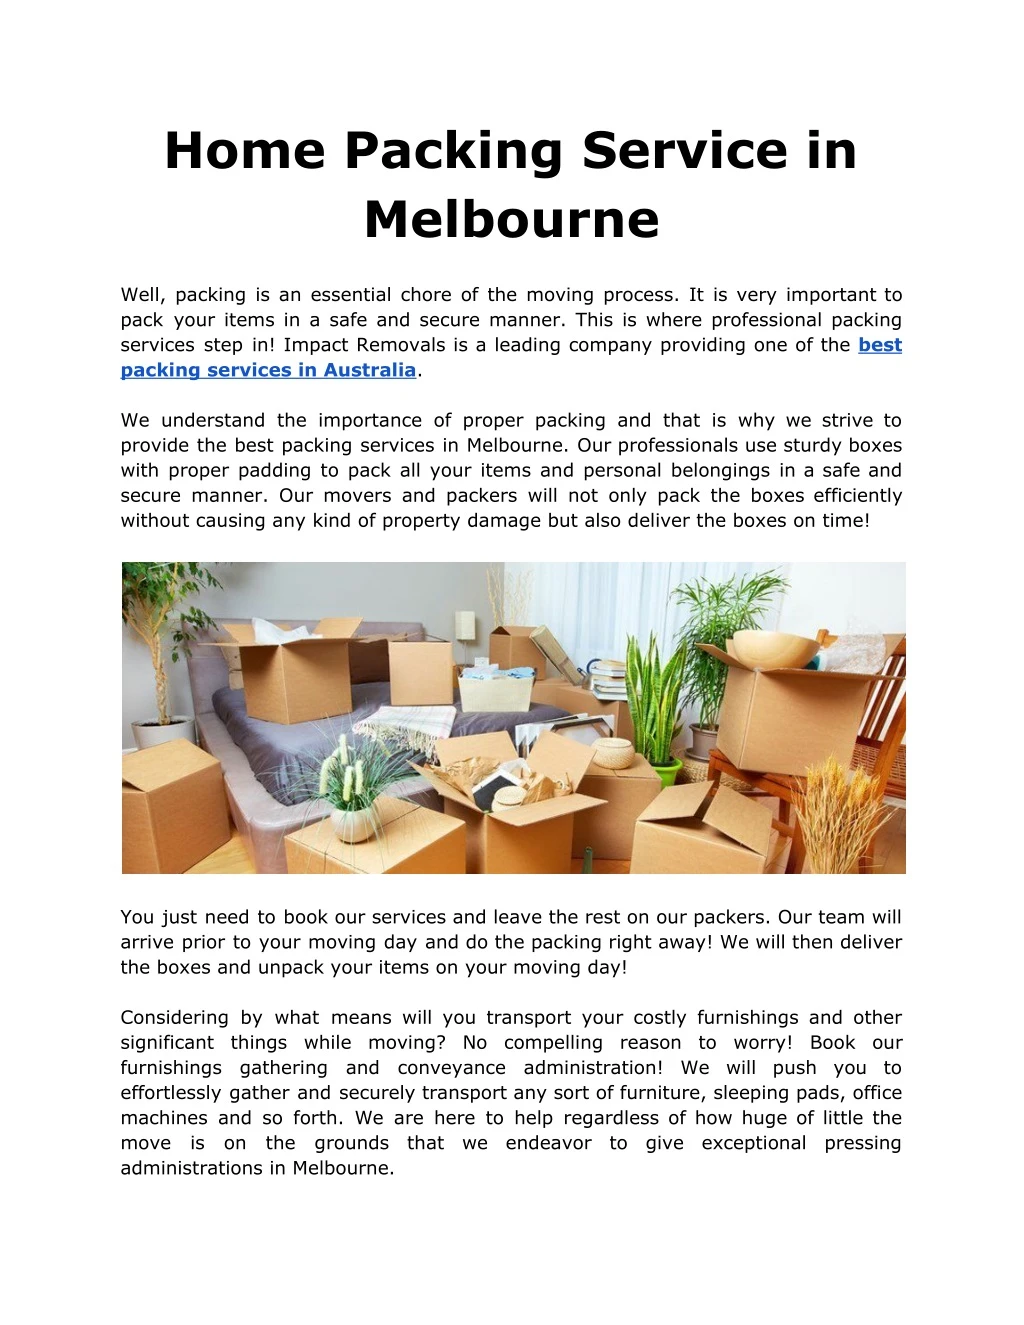 home packing service in melbourne n.